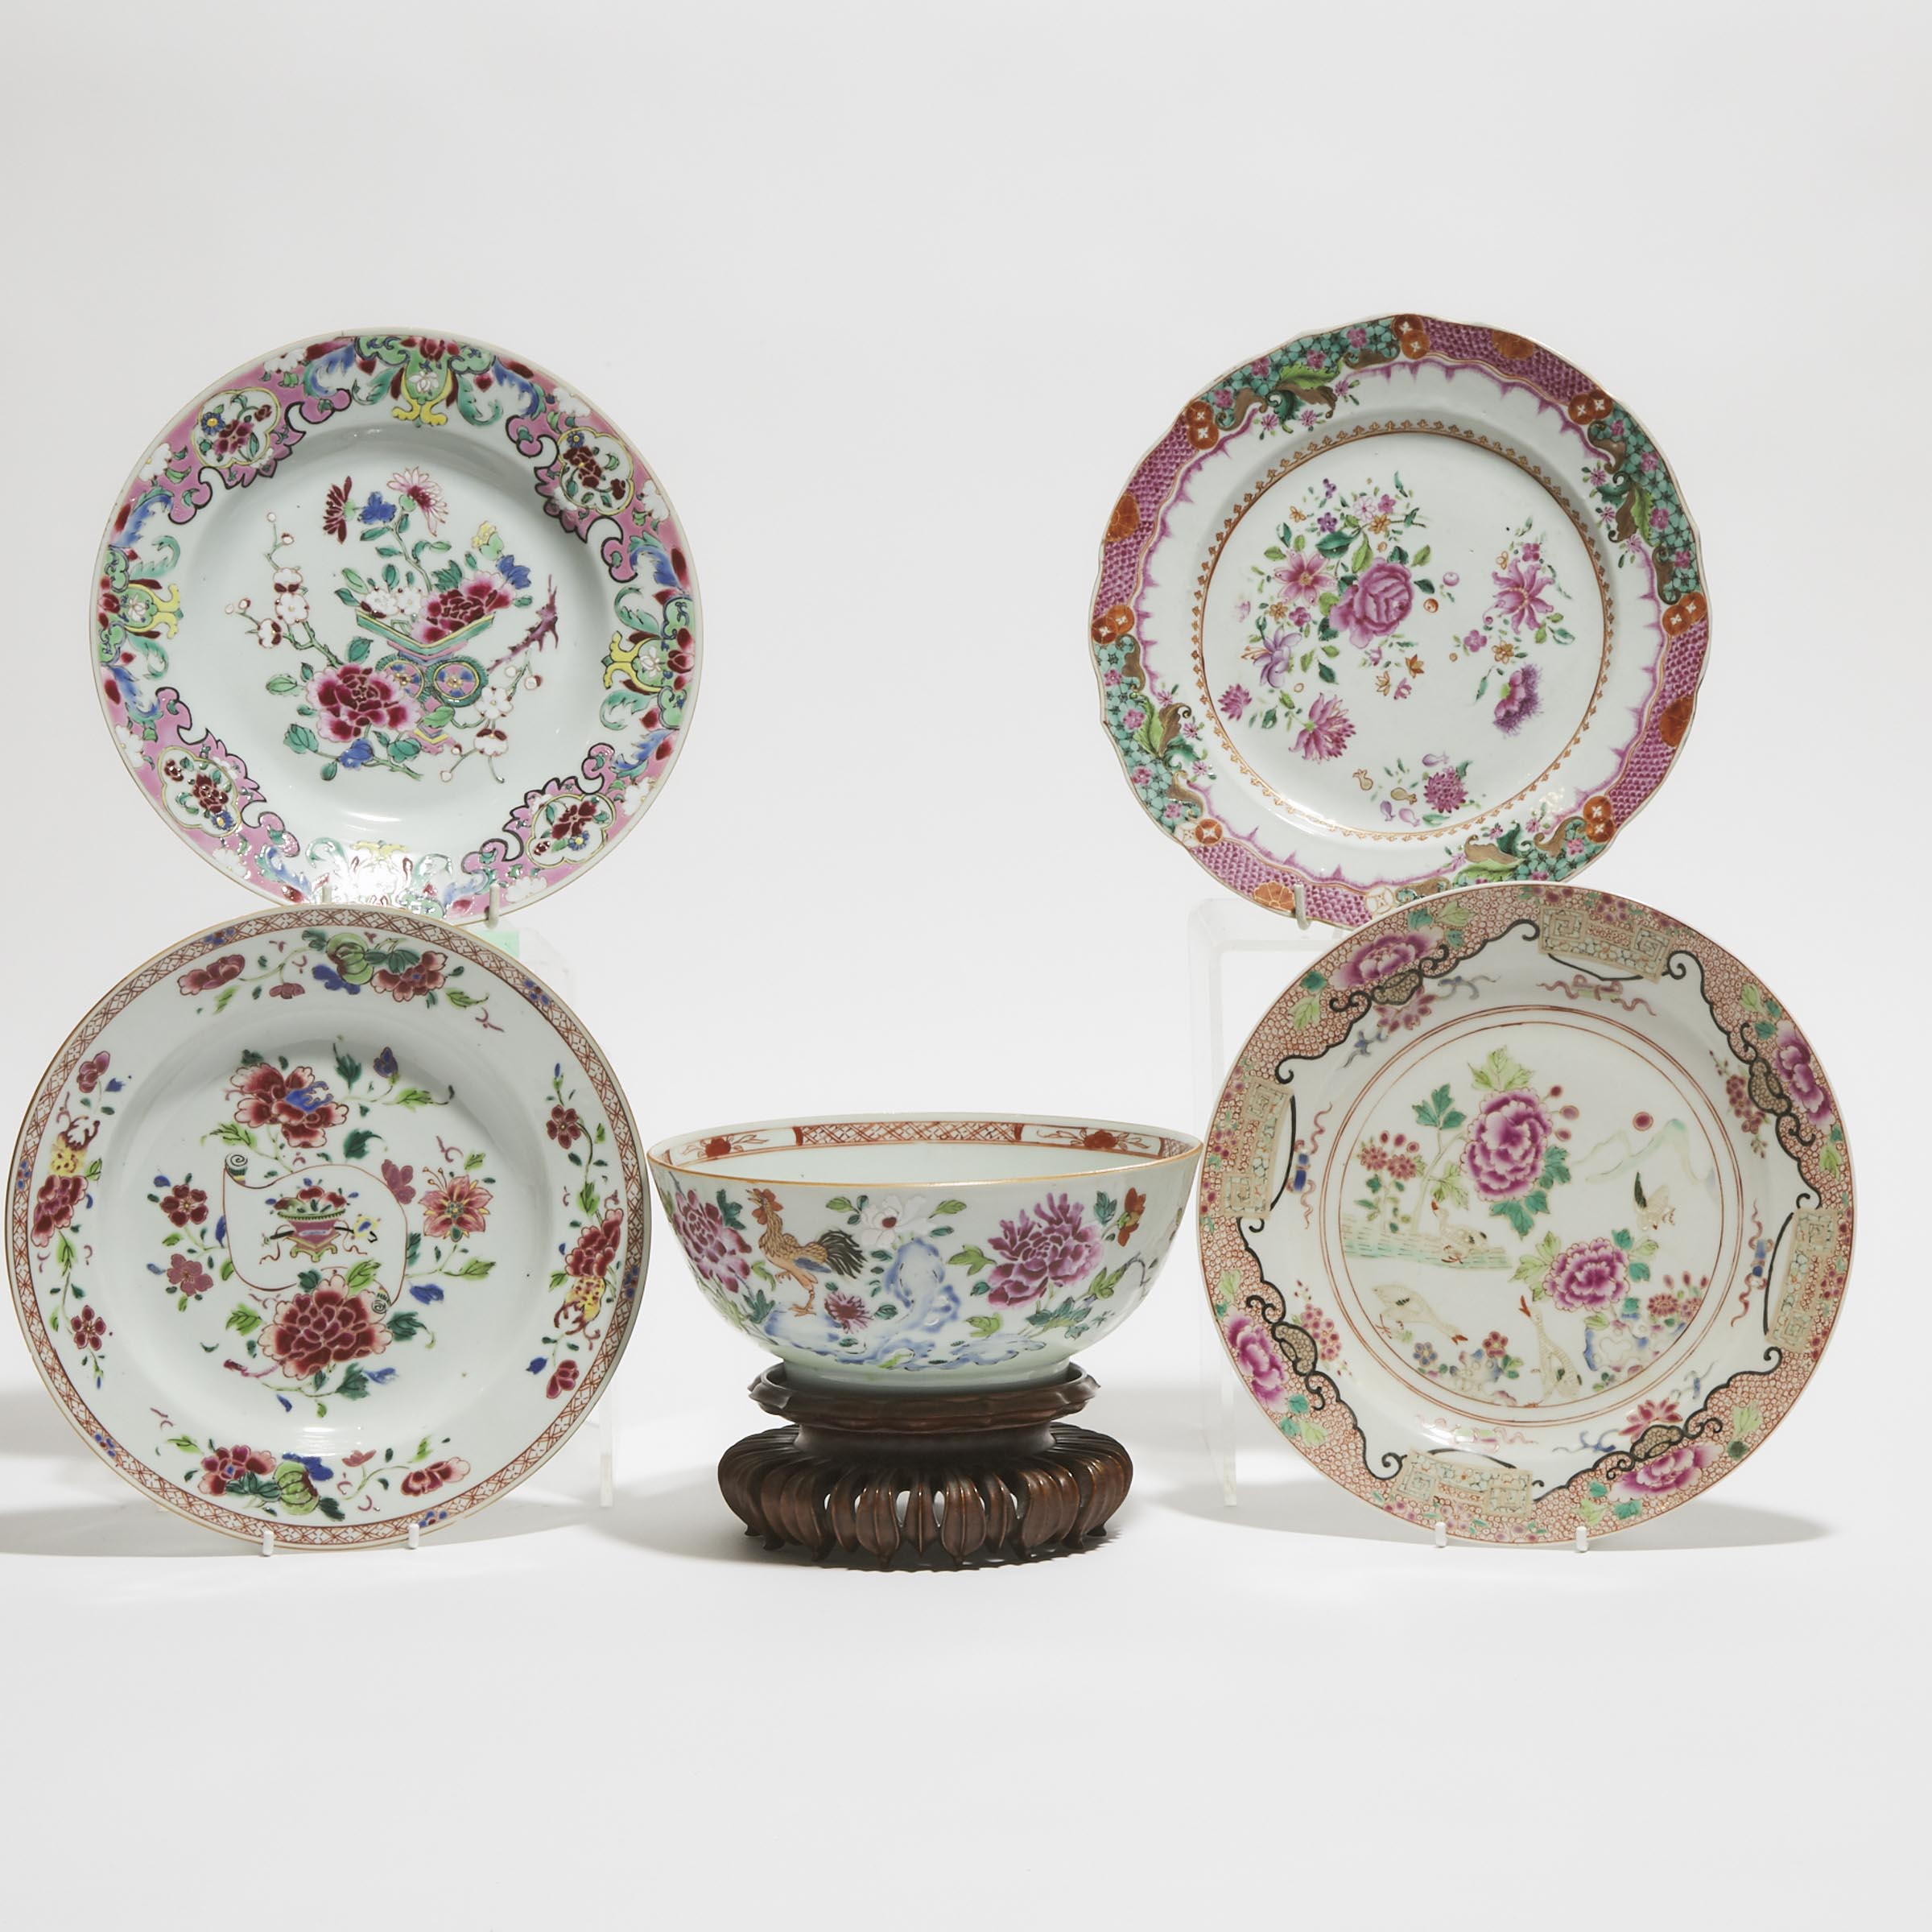 A Group of Four Famille Rose Plates, together with a Punch Bowl, Qianlong Period, 18th Century